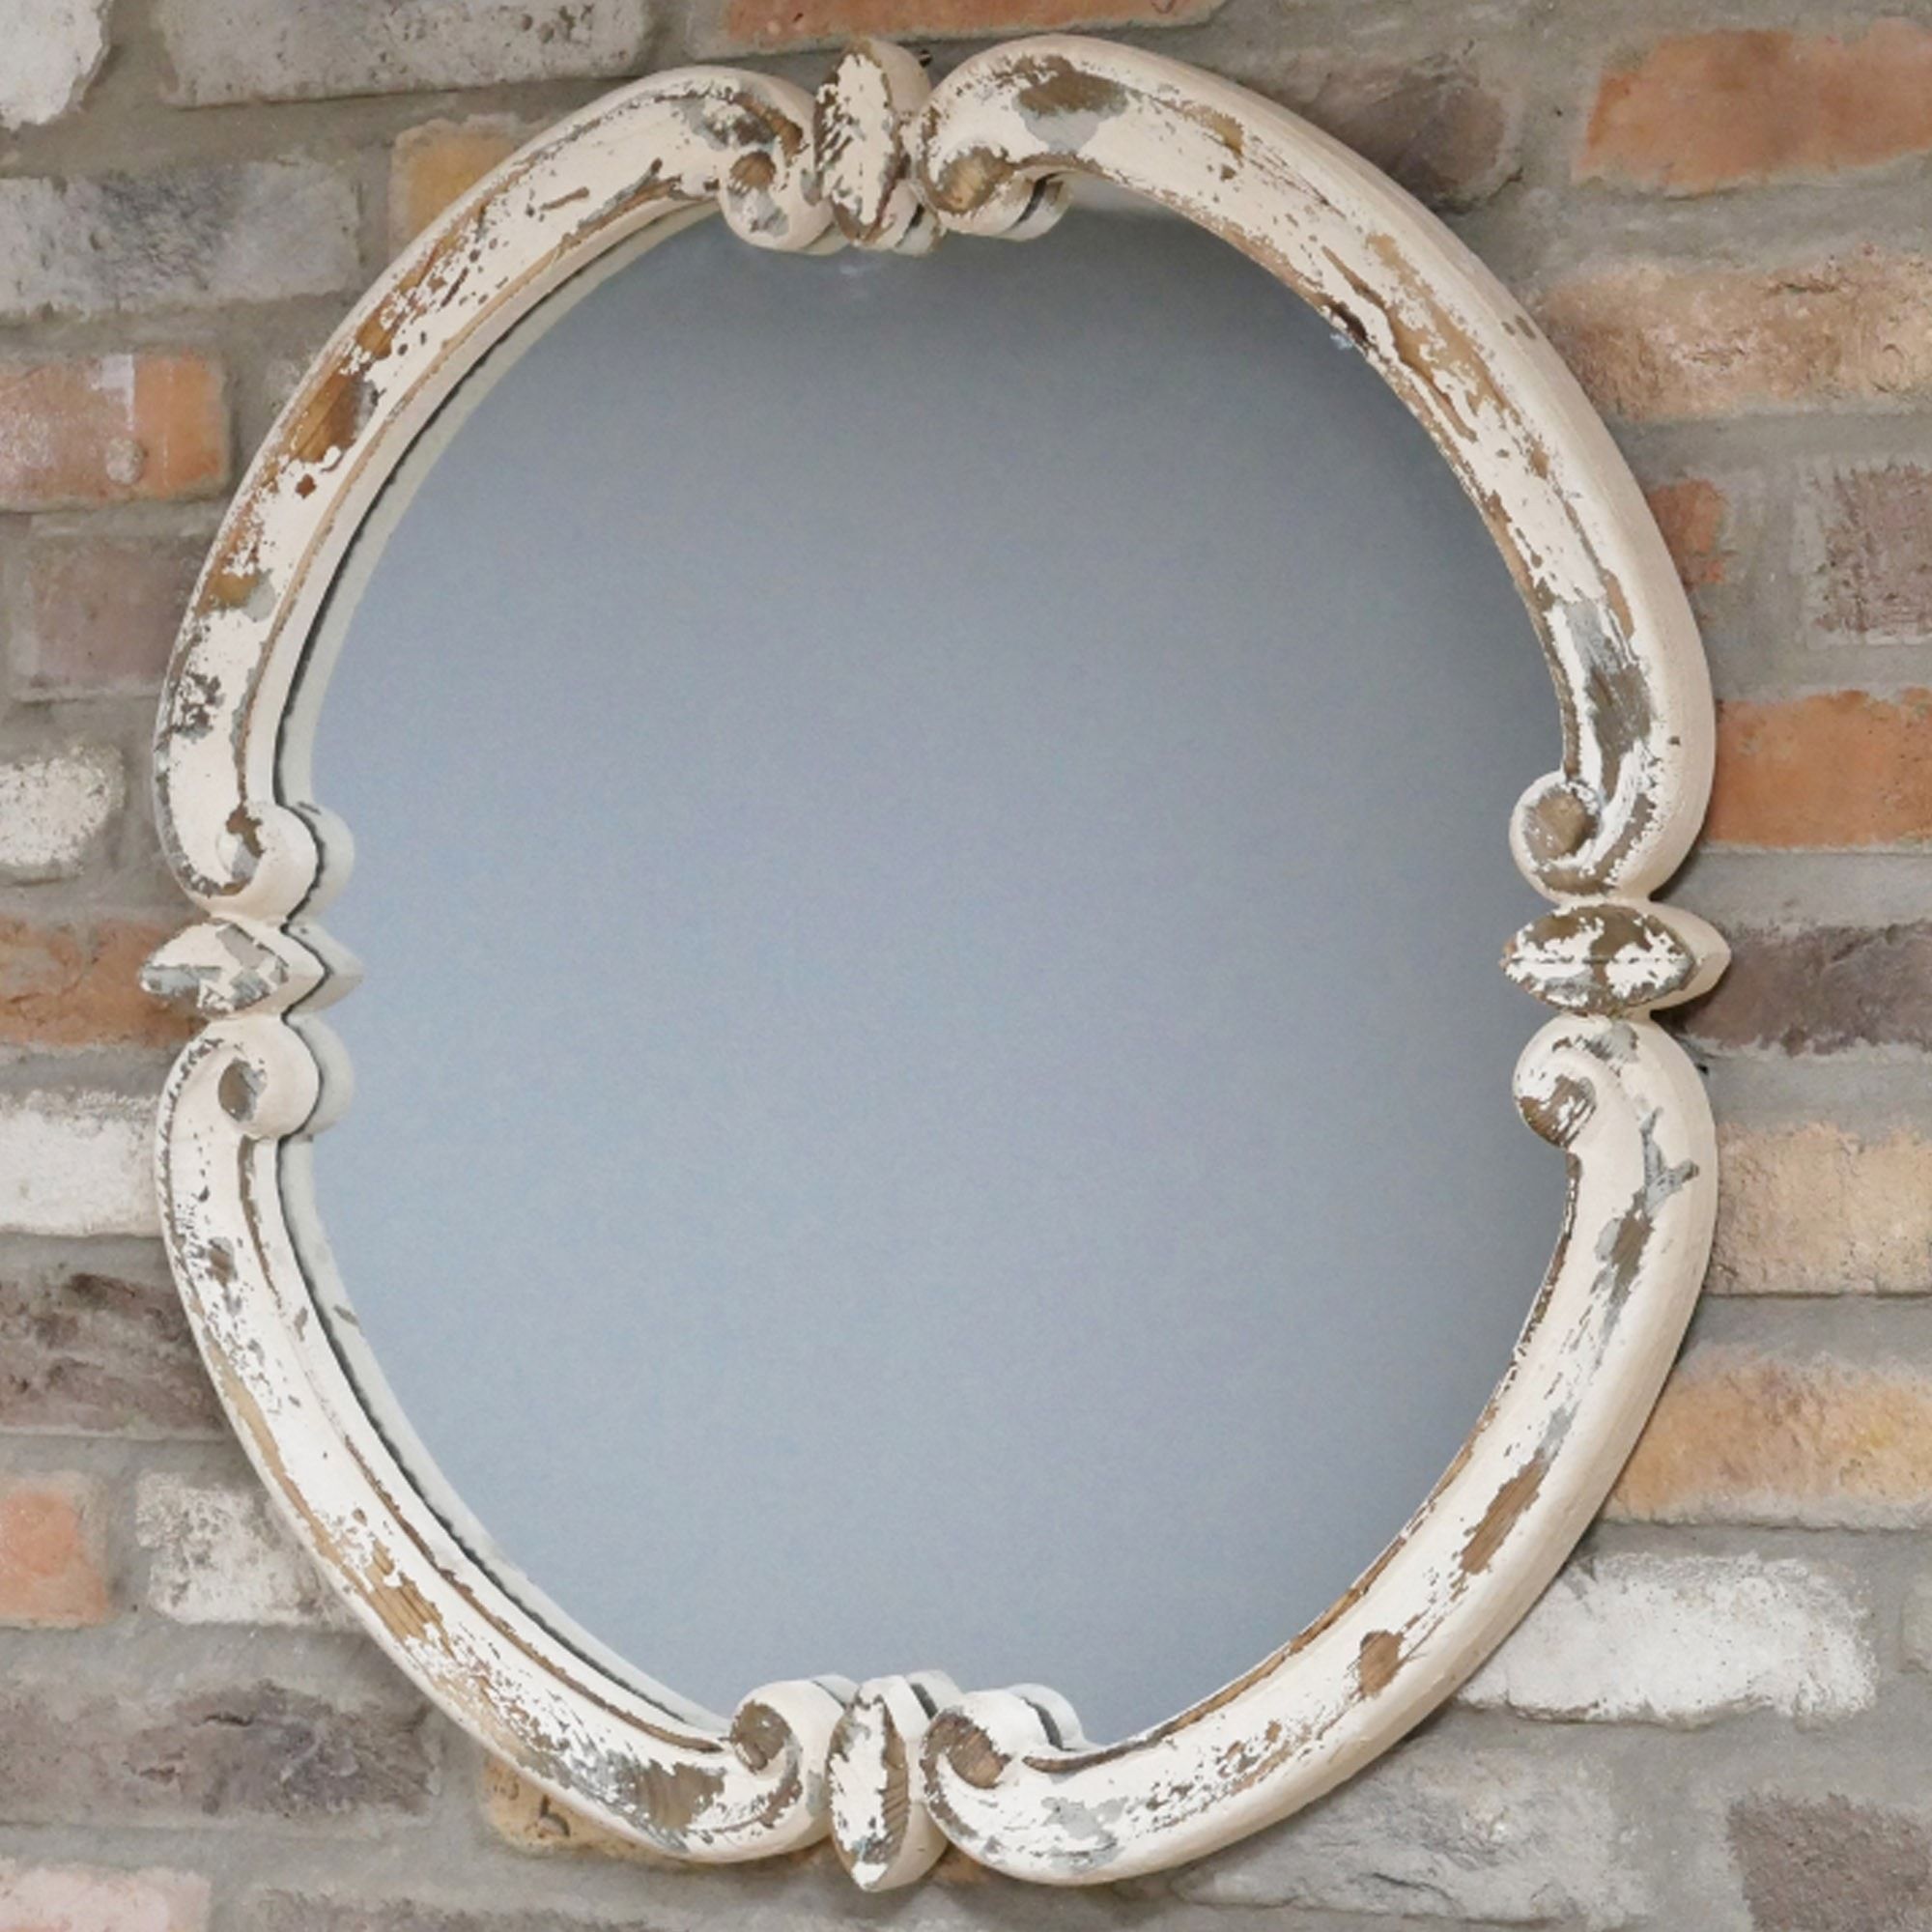 Distressed White Mirror | Wall Mirrors | Decorative Mirrors With Wall Mirrors (View 14 of 15)